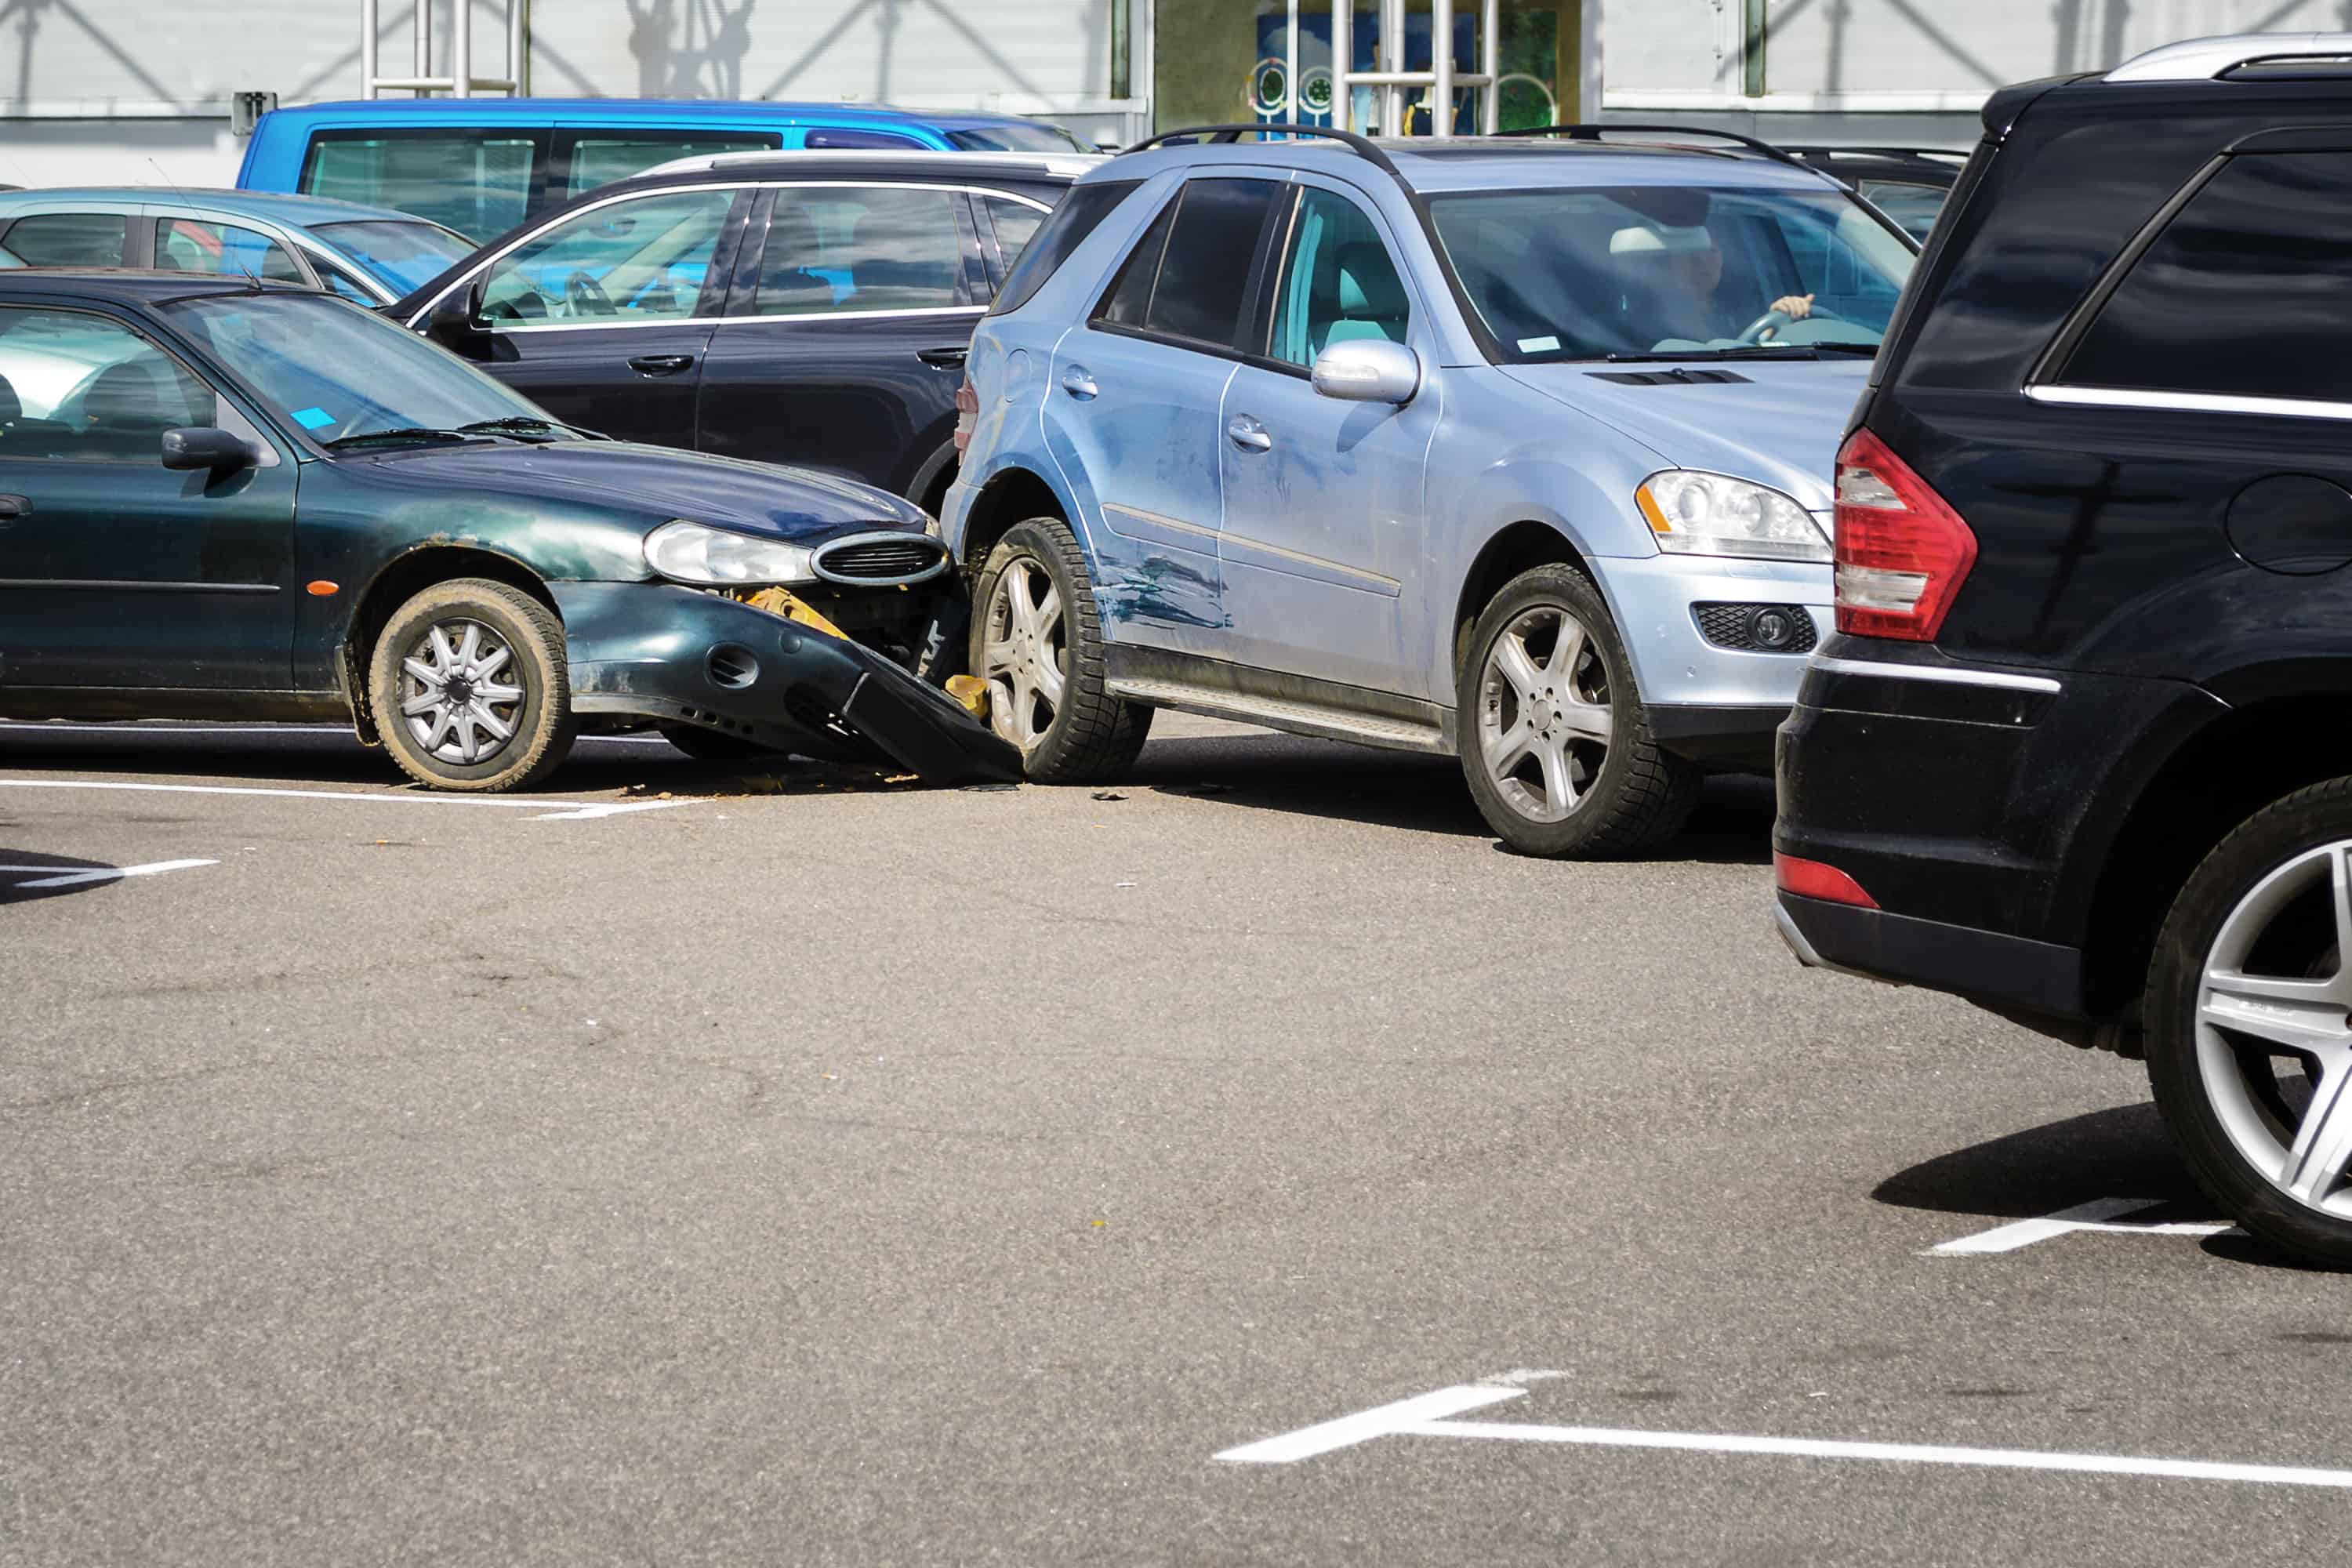 How to Deal with Parking Lot Accidents